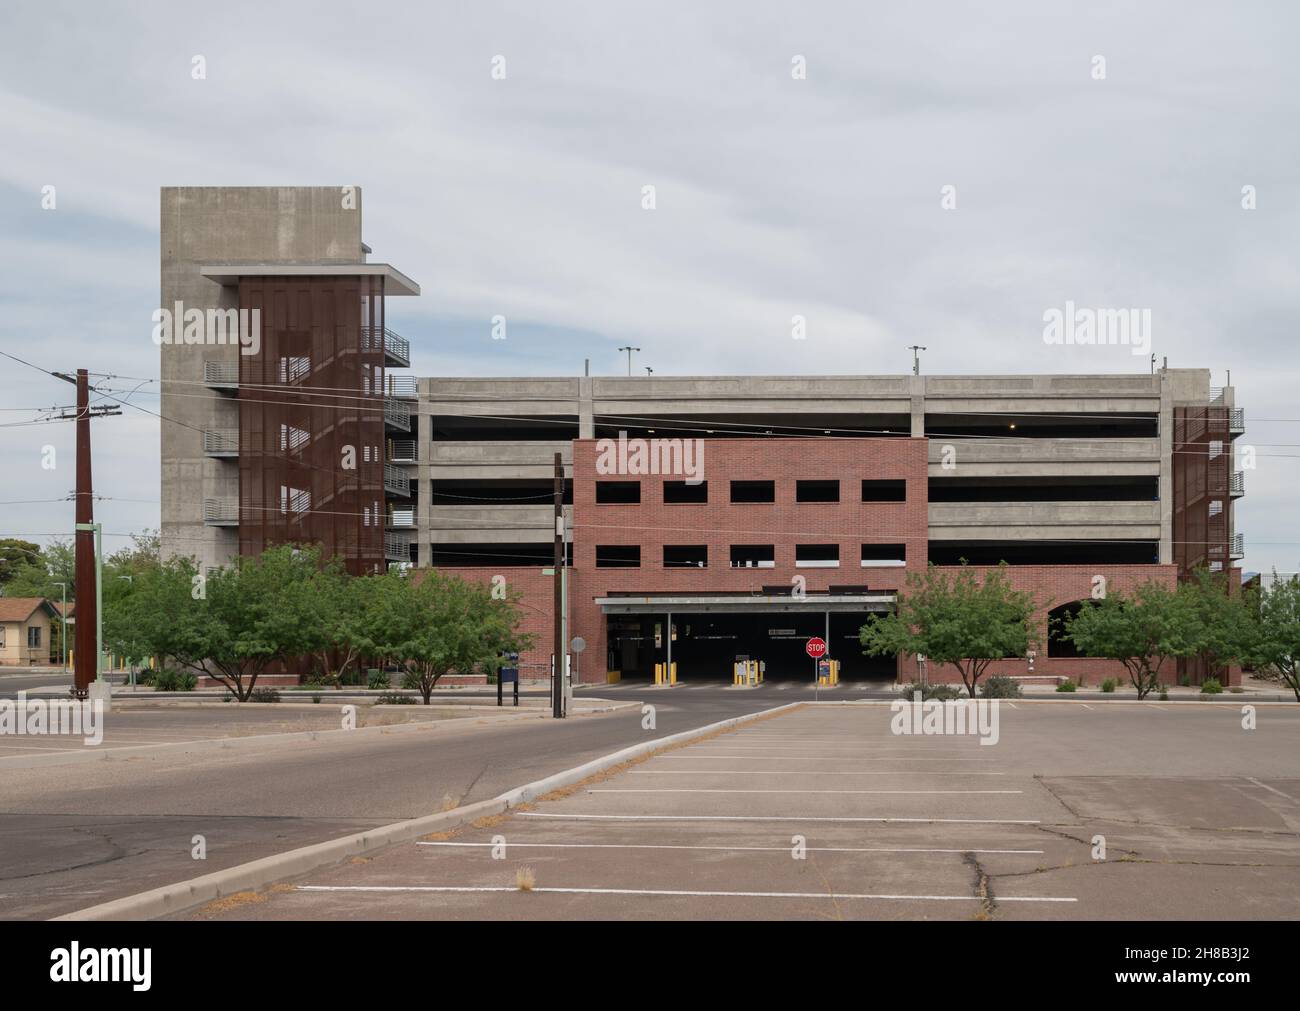 Empty parking garage and parking lot in city Stock Photo